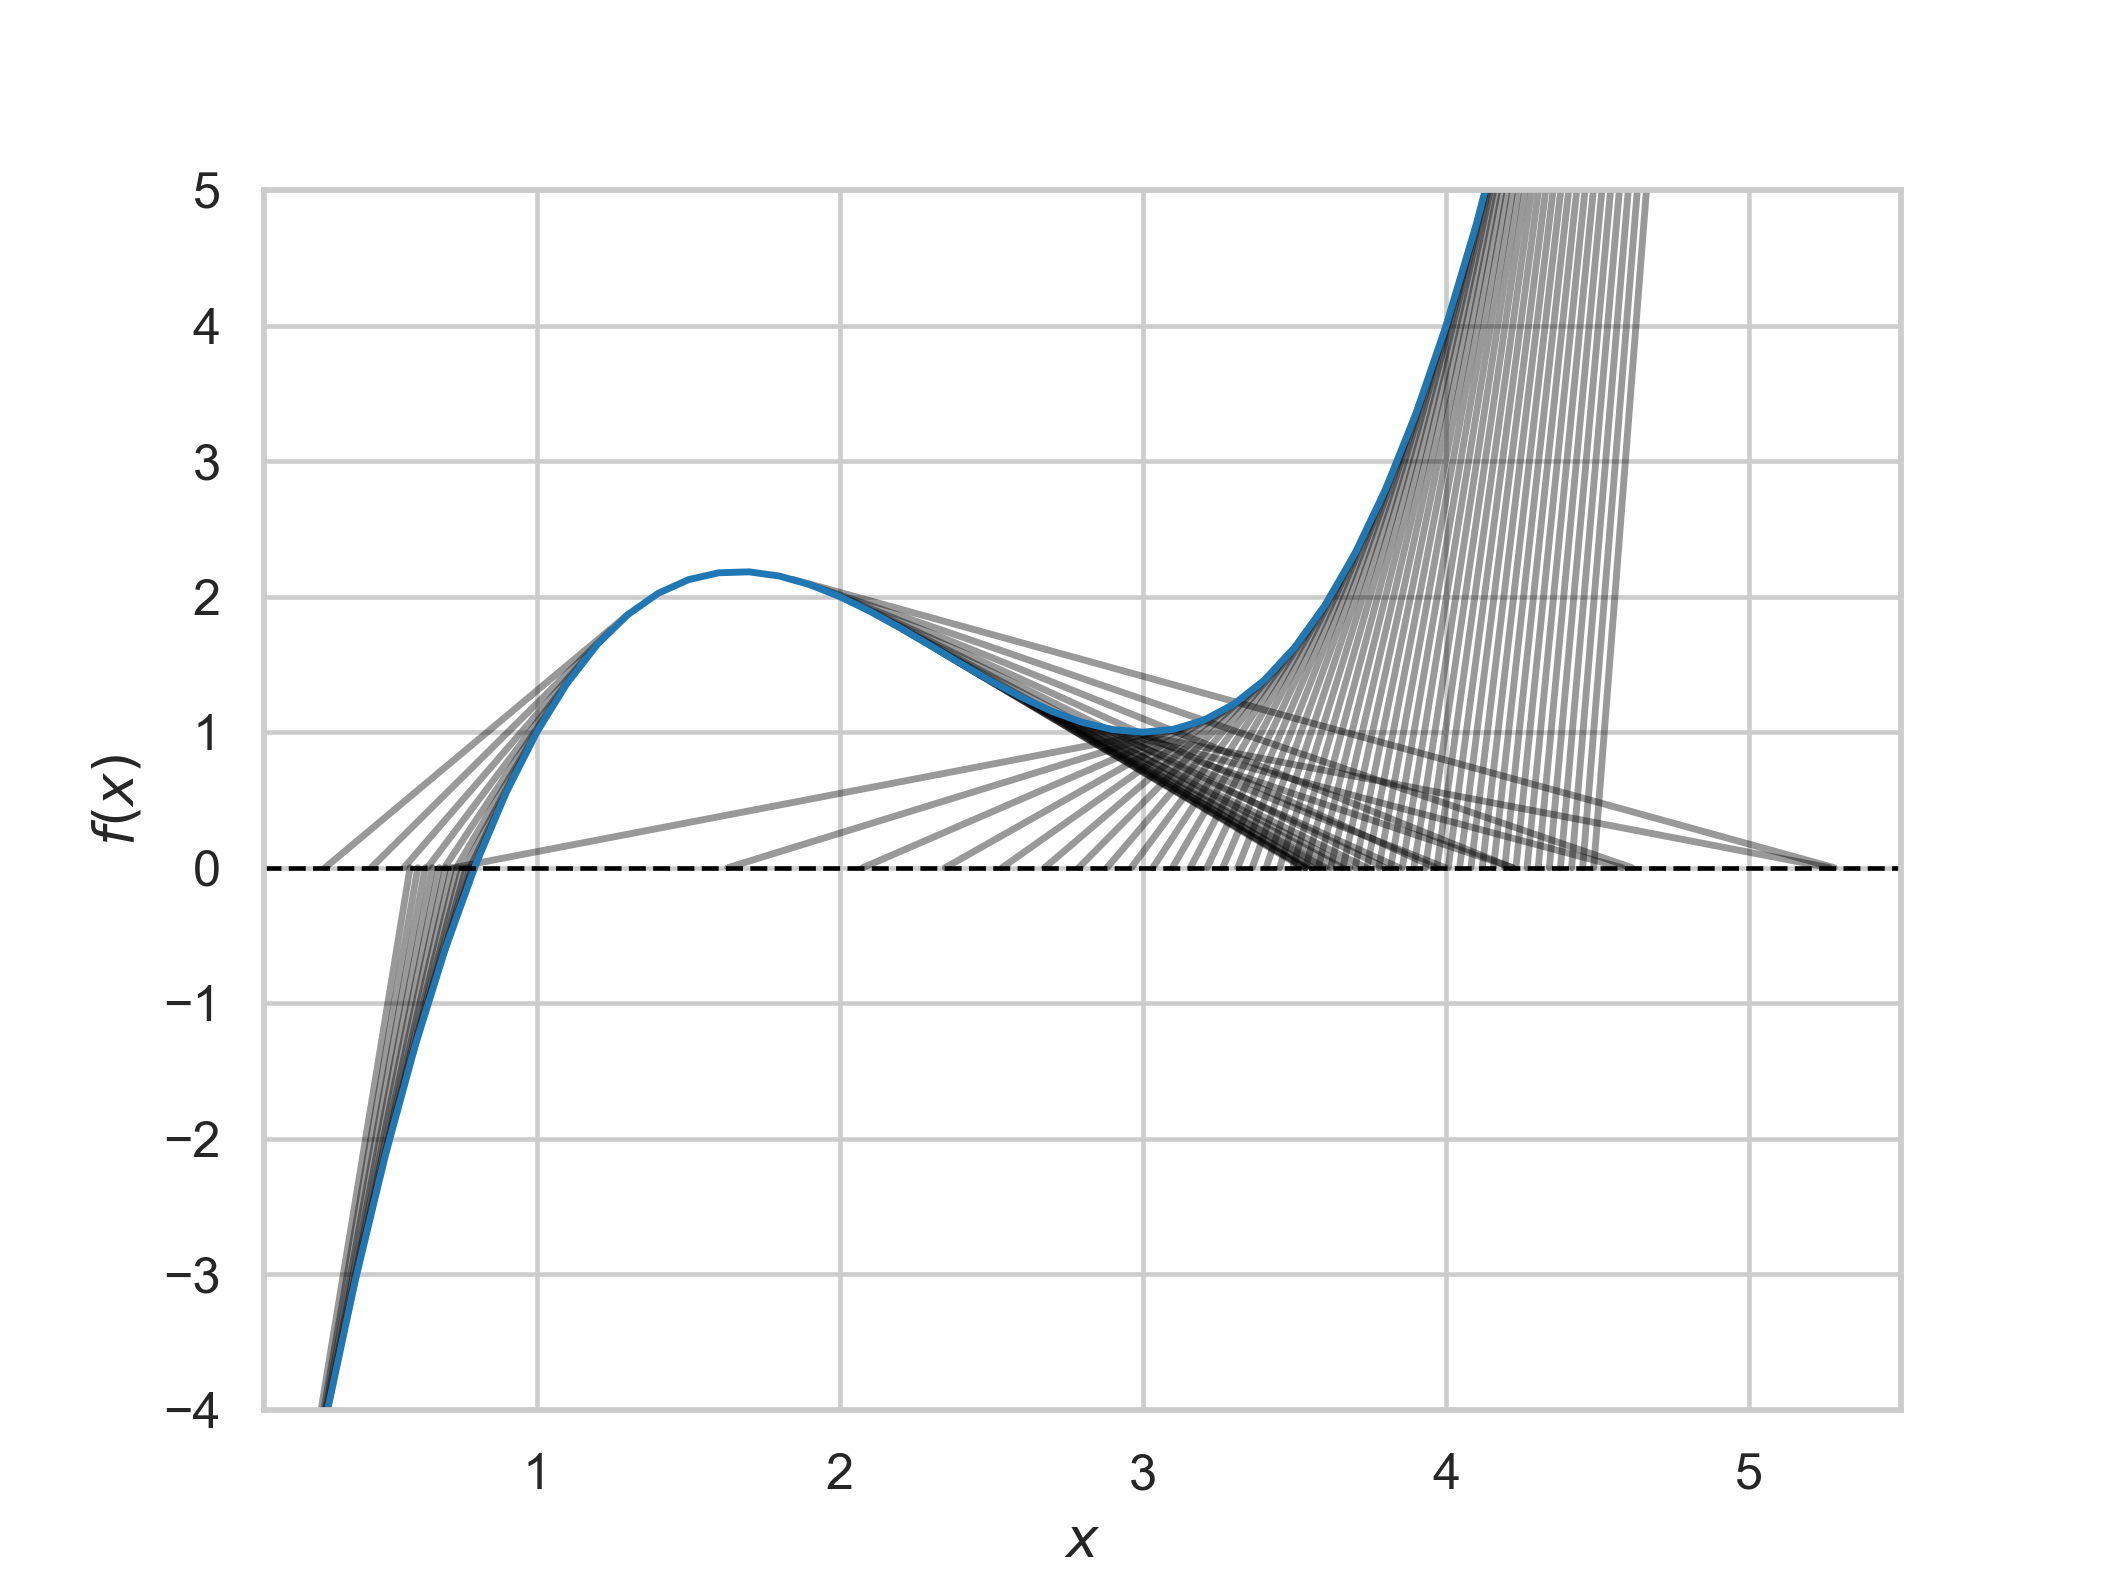 One step of Newton's method for a function